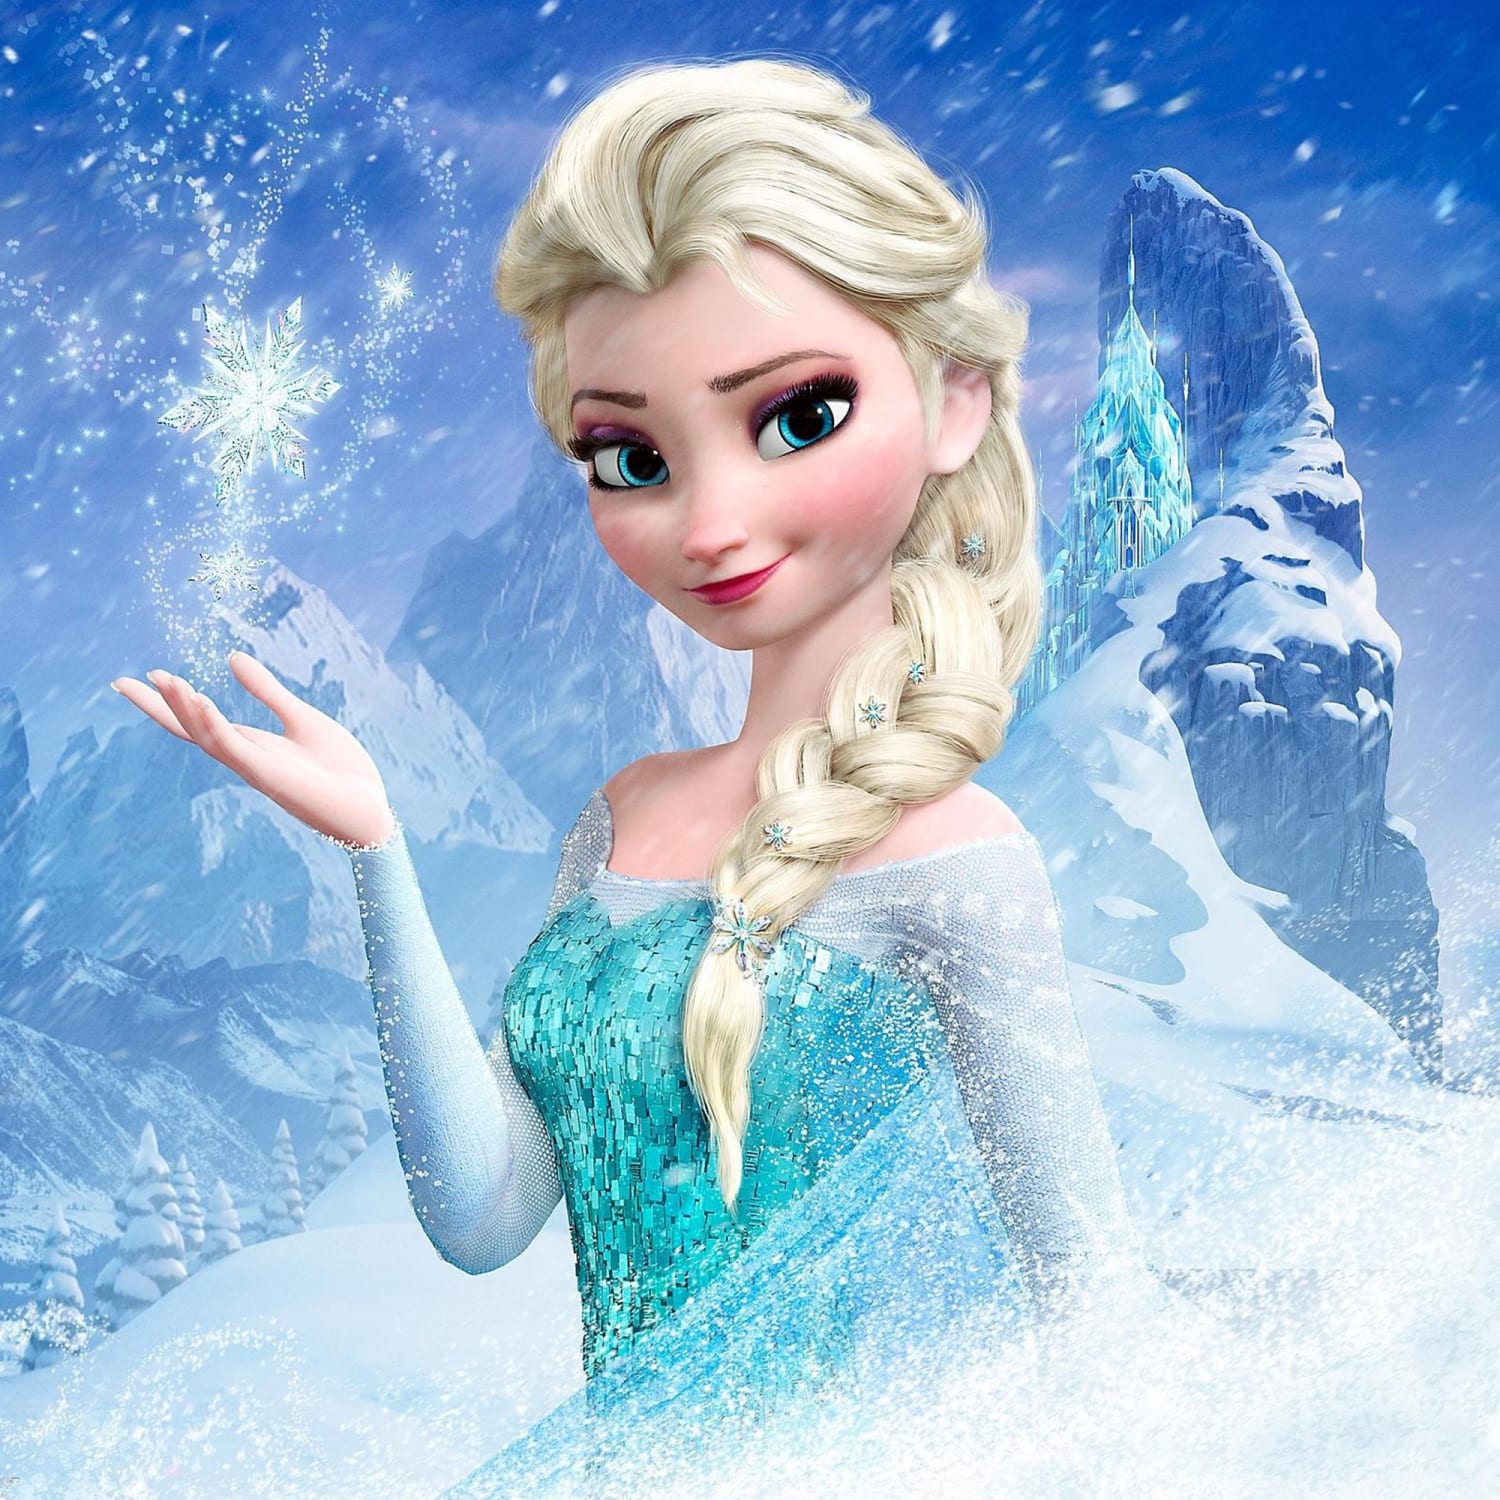 Here's why Elsa won't have a love interest in 'Frozen 2'